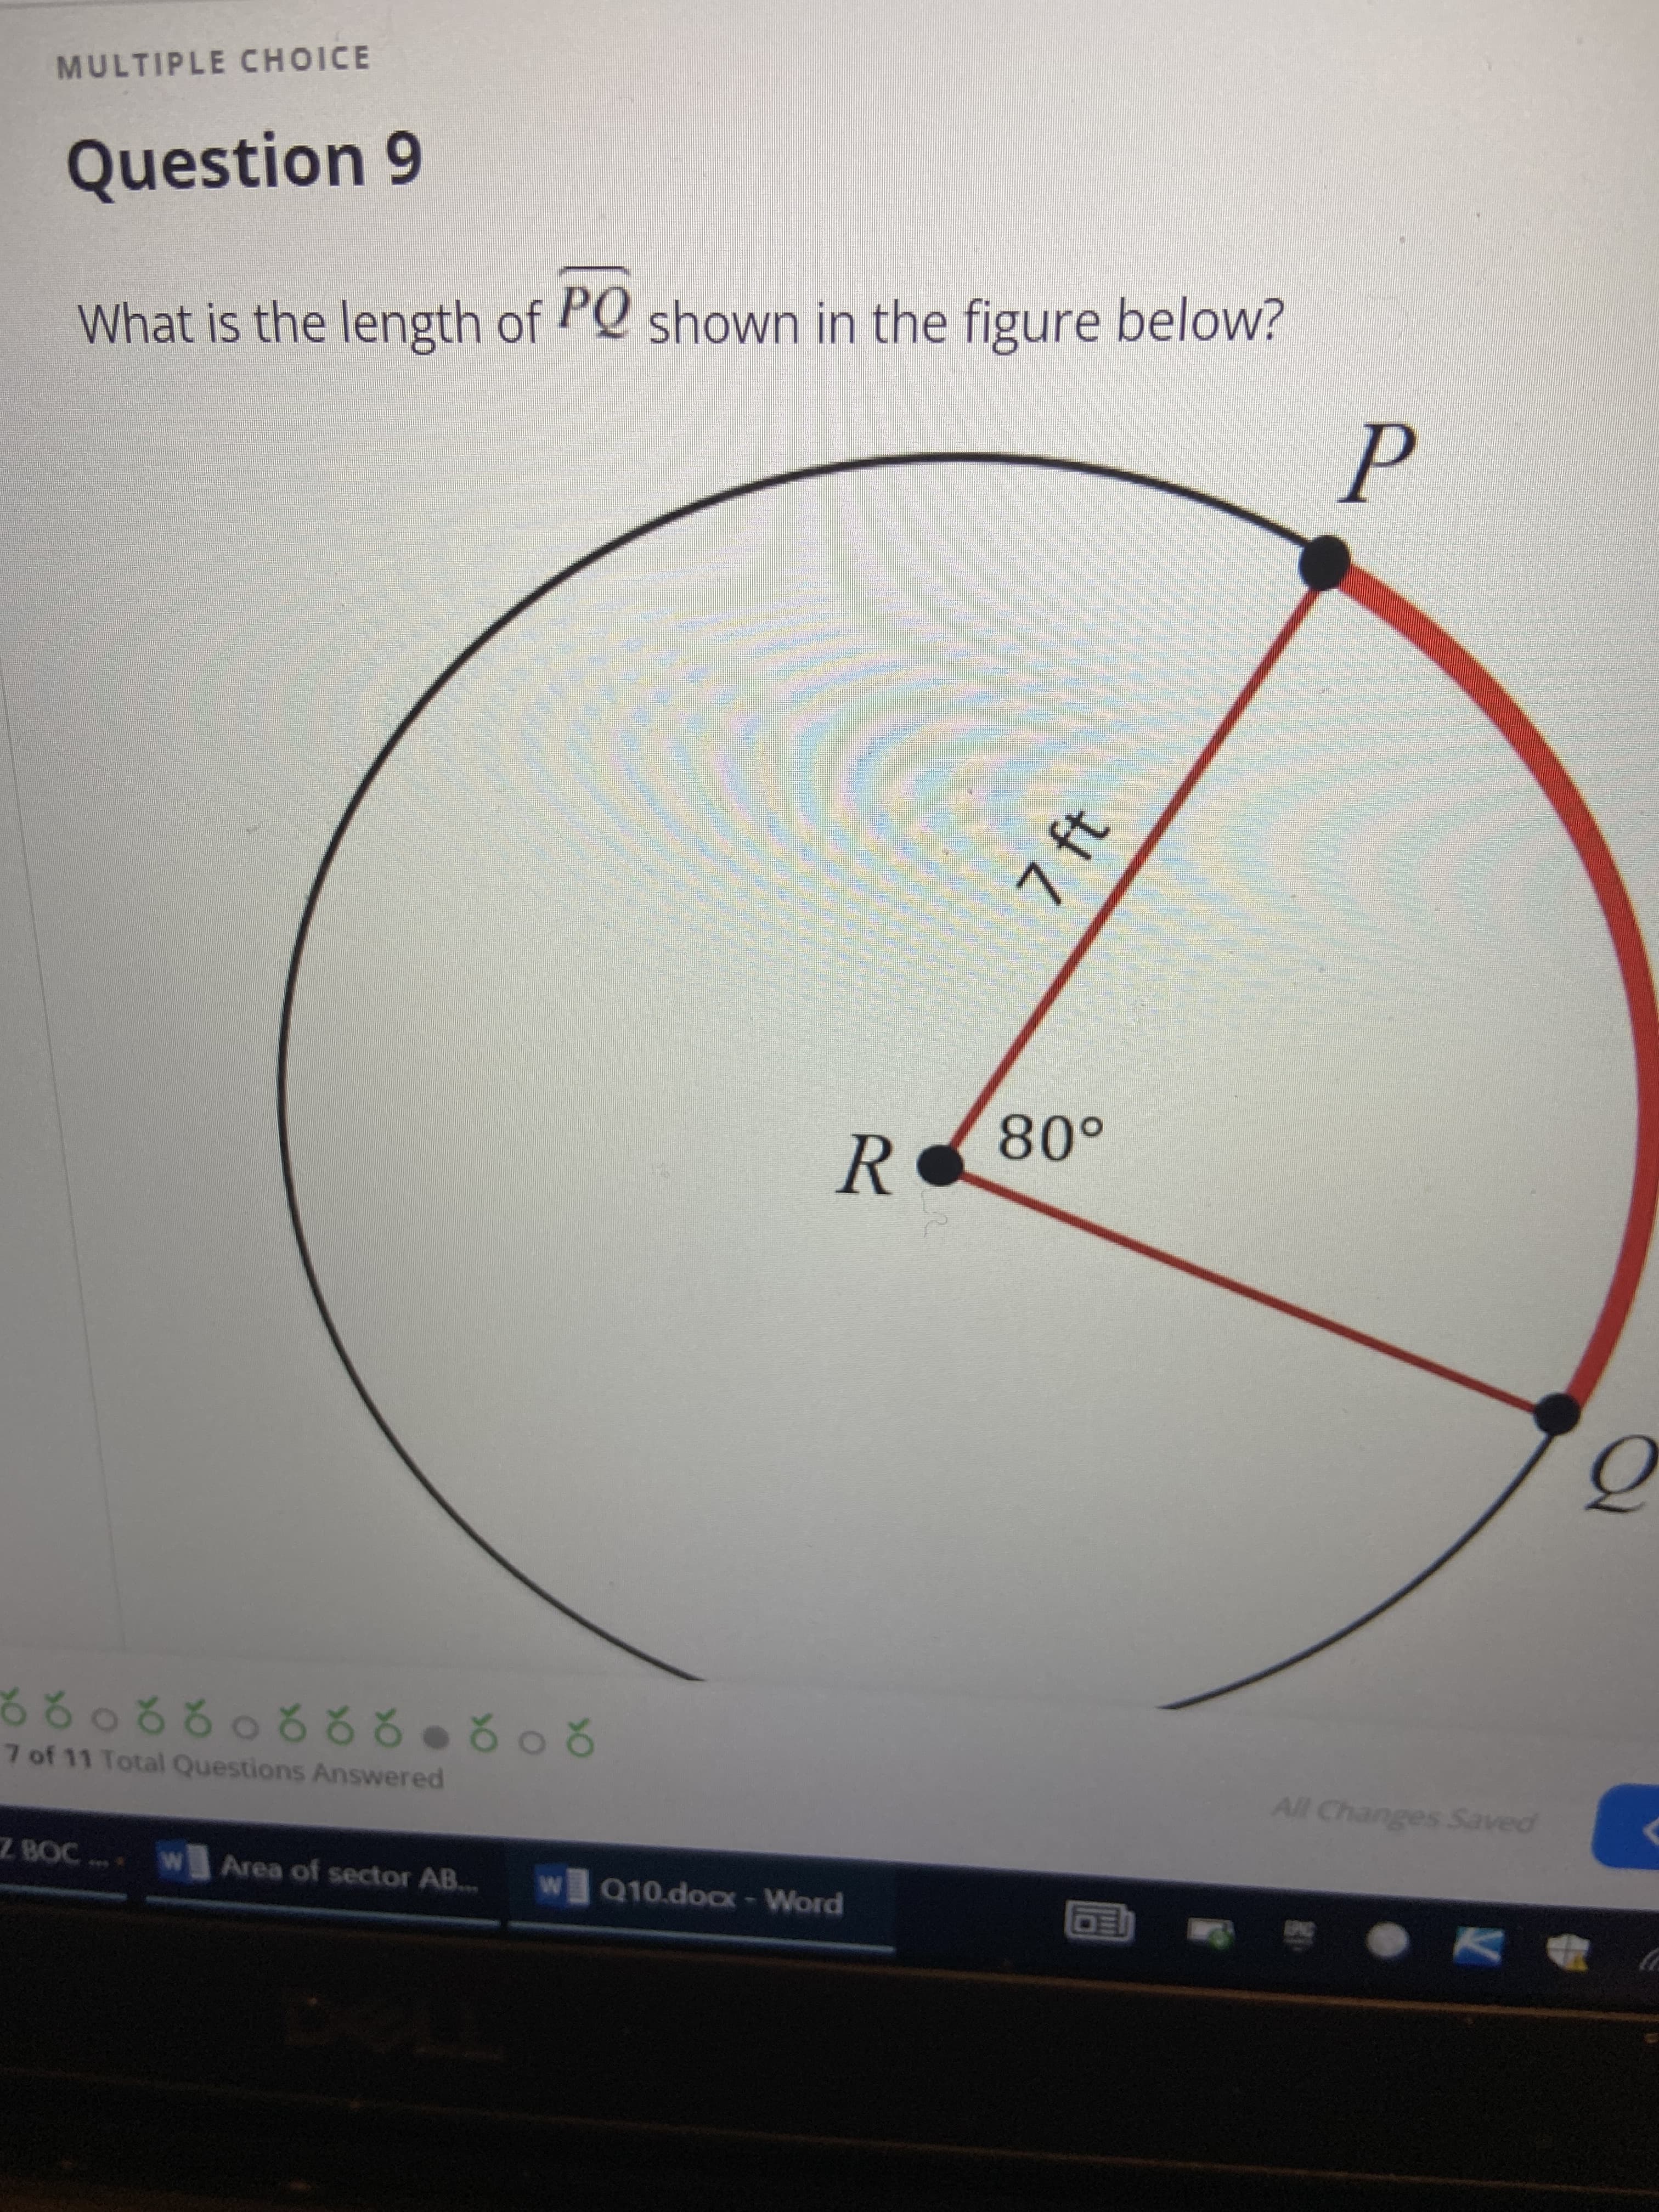 7 ft
MULTIPLE CHOICE
Question 9
What is the length of PQ shown in the figure below?
7 of 11 Total Questions Answered
2090222092099
All Changes Saved
ZBOC
C
W Area of sector AB...
W Q10.dox-Word
